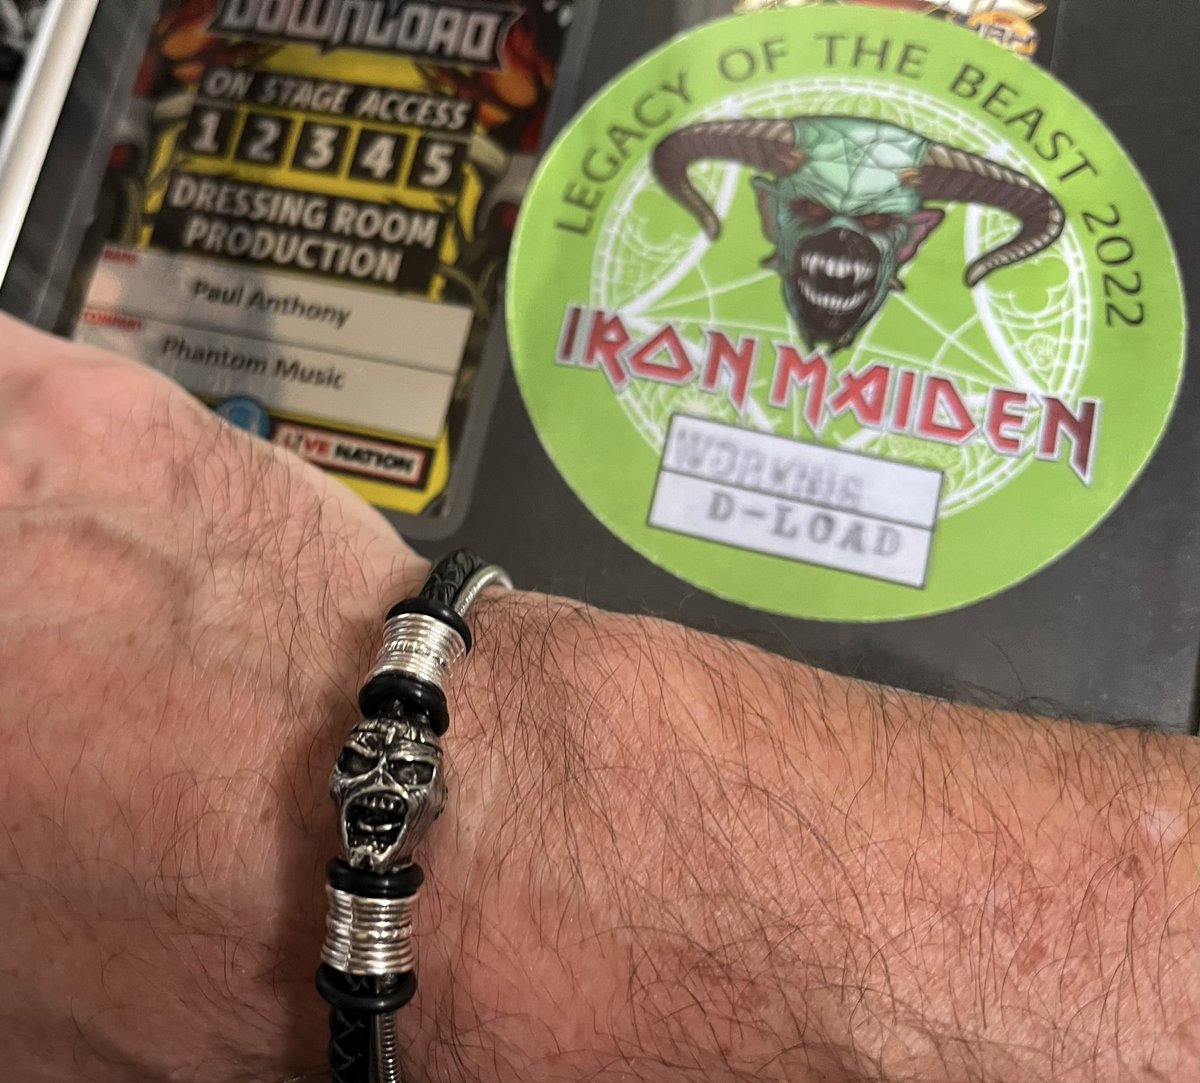 Lovin’ my new @IronMaiden Bracelet from @the_guitarwrist made up from Bass Guitar strings played by Steve Harris at @DownloadFest last June. 💯% of the profits from the sale of these goes to Maiden’s chosen charity @hmtruants. more from your fave bands at theguitarwrist.co.uk